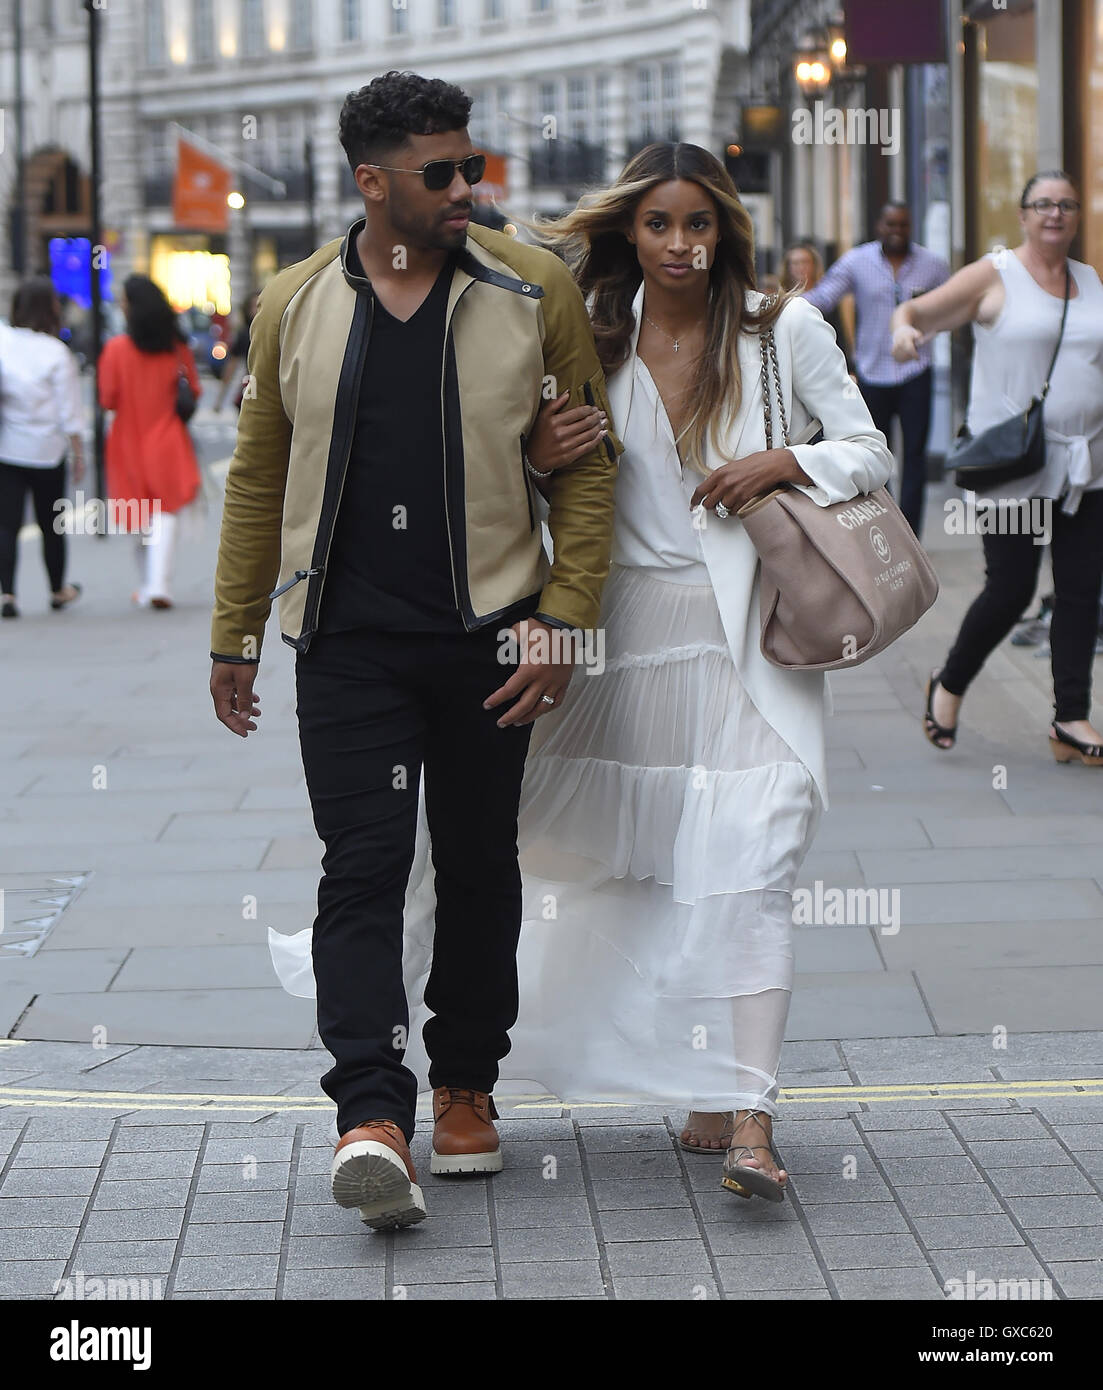 All About Ciara's Wedding & Love Story